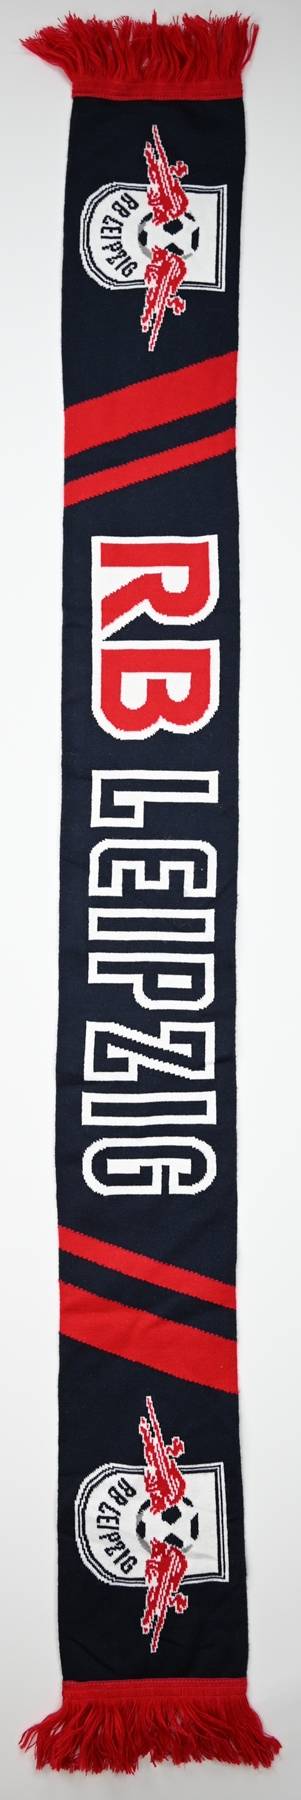 RB LEIPZIG SCARF Other \ Scarves | Classic-Shirts.com